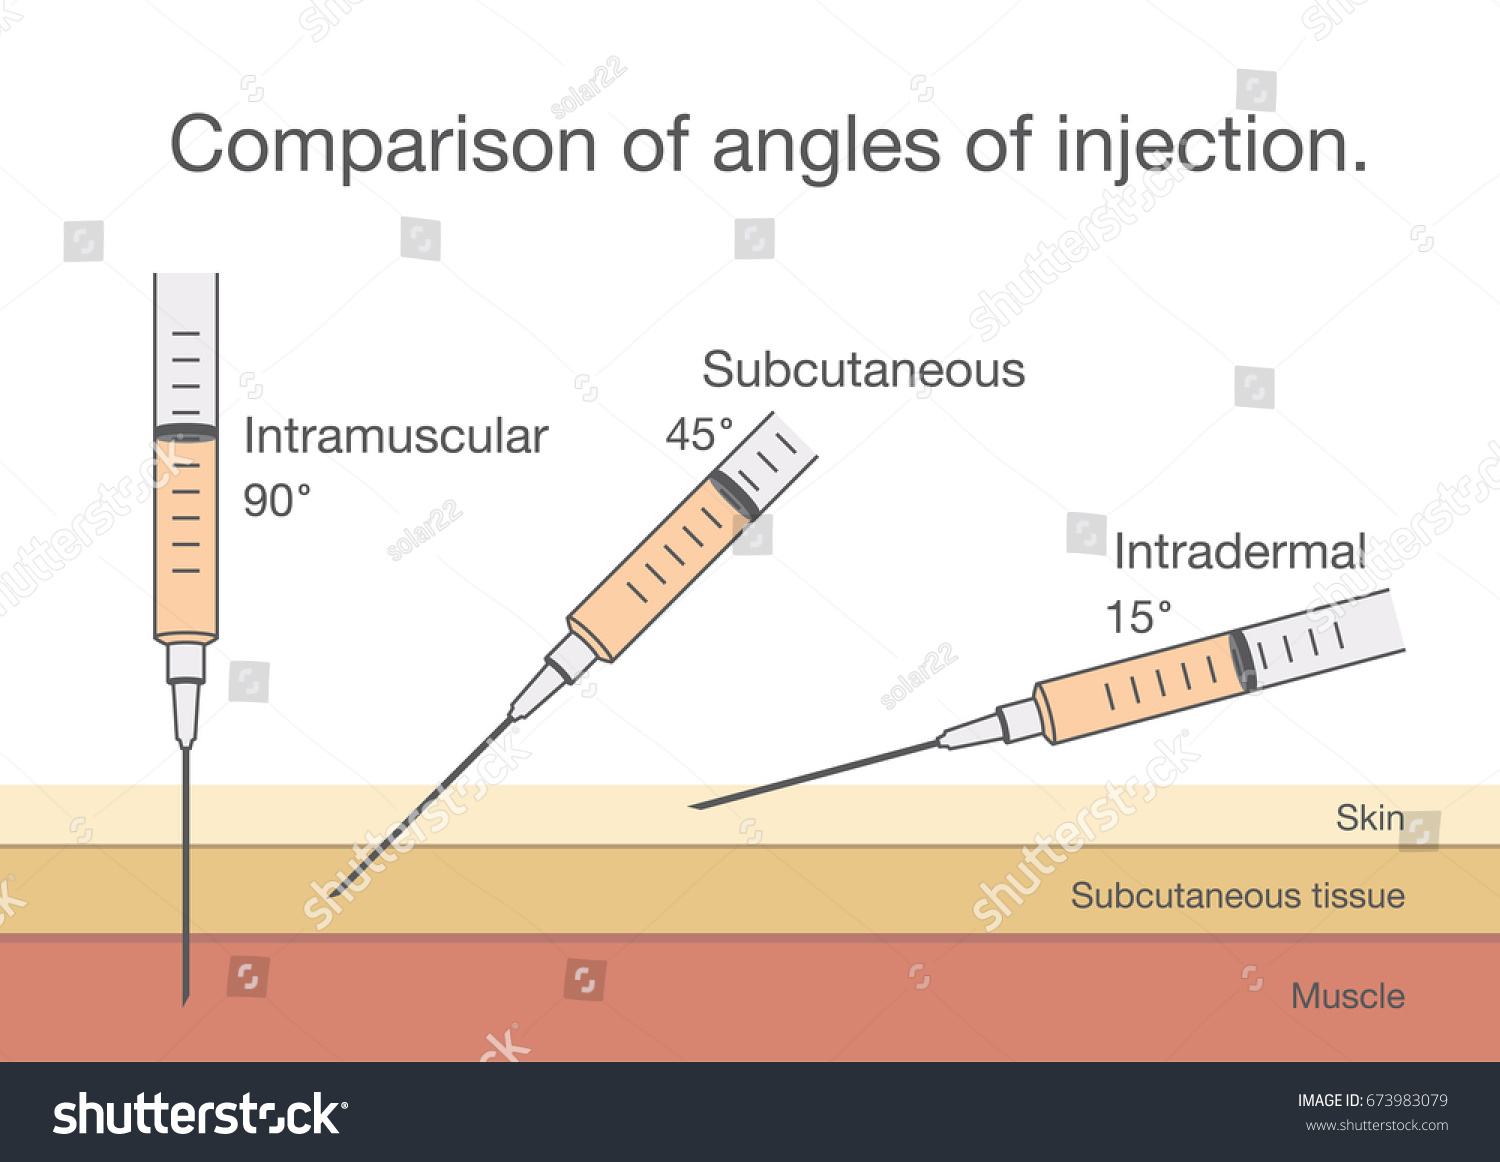 Types Of Injections And Angles